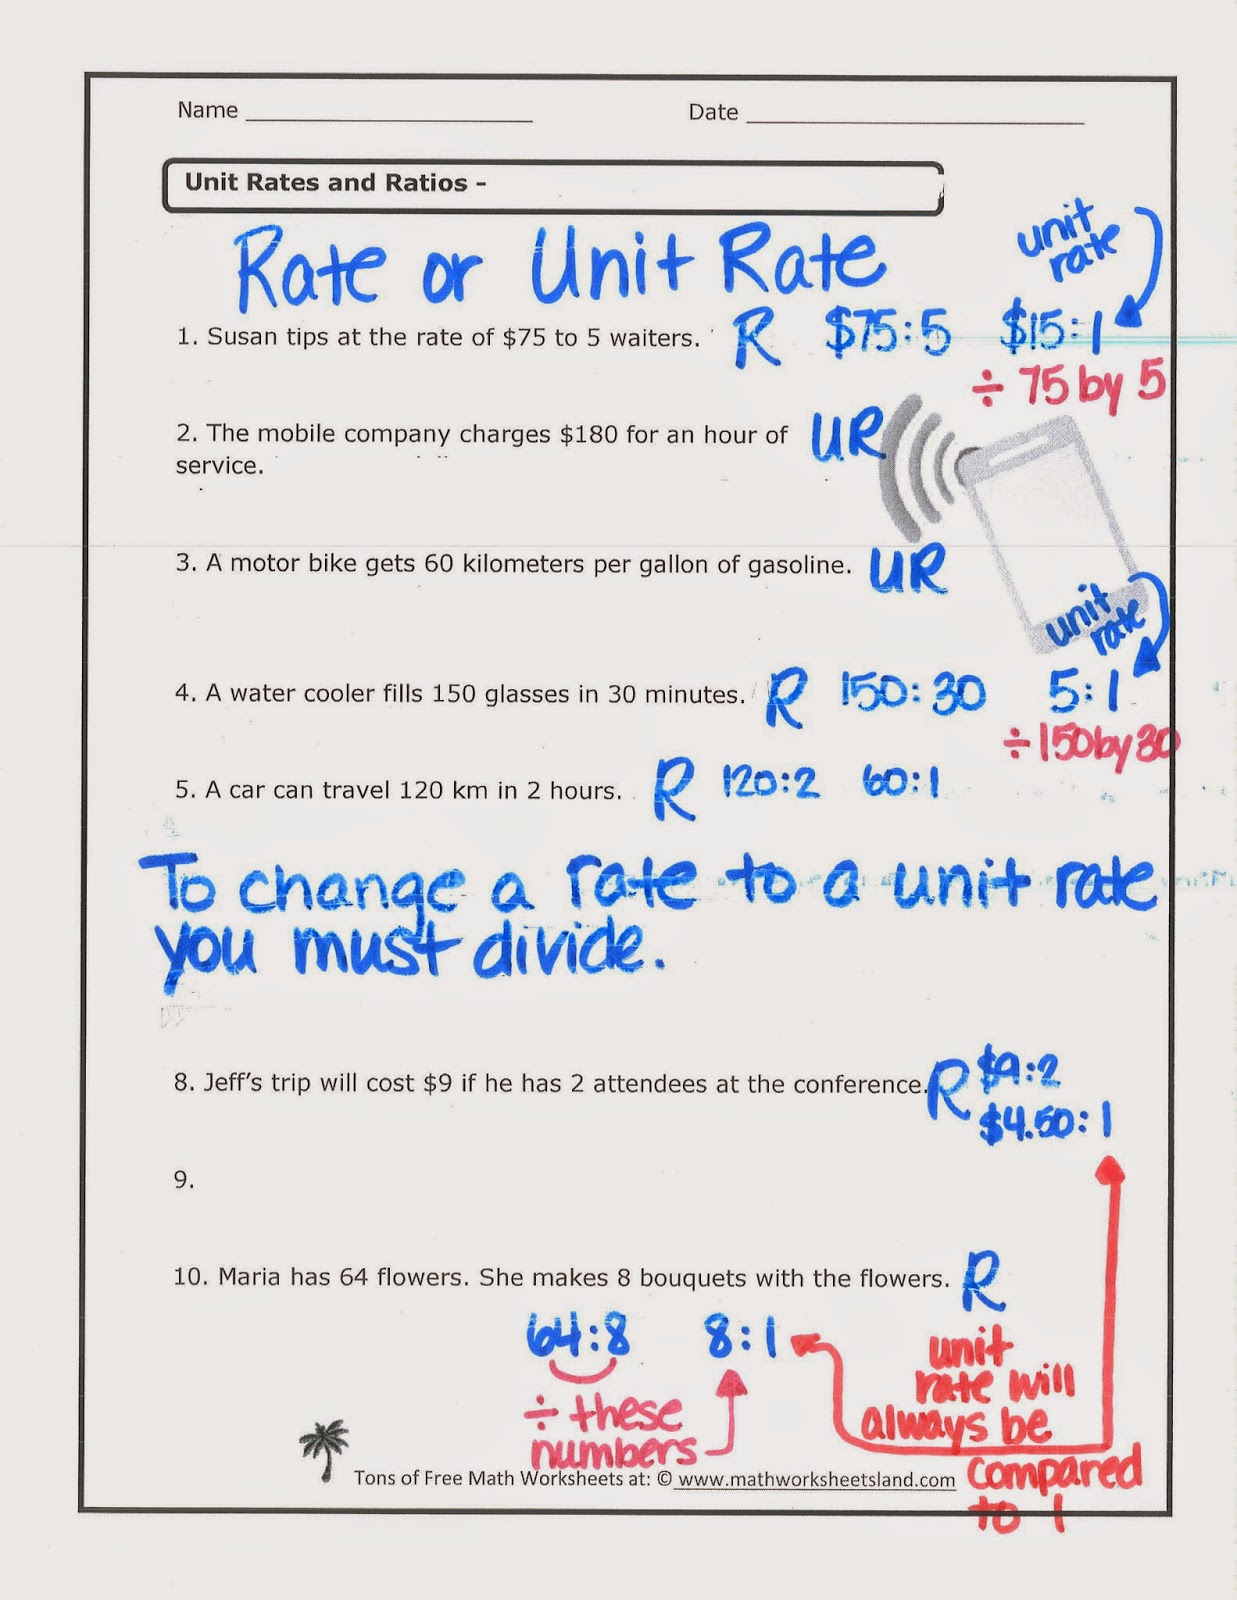 Mrs. White's 6th Grade Math Blog: WHAT ARE RATES?